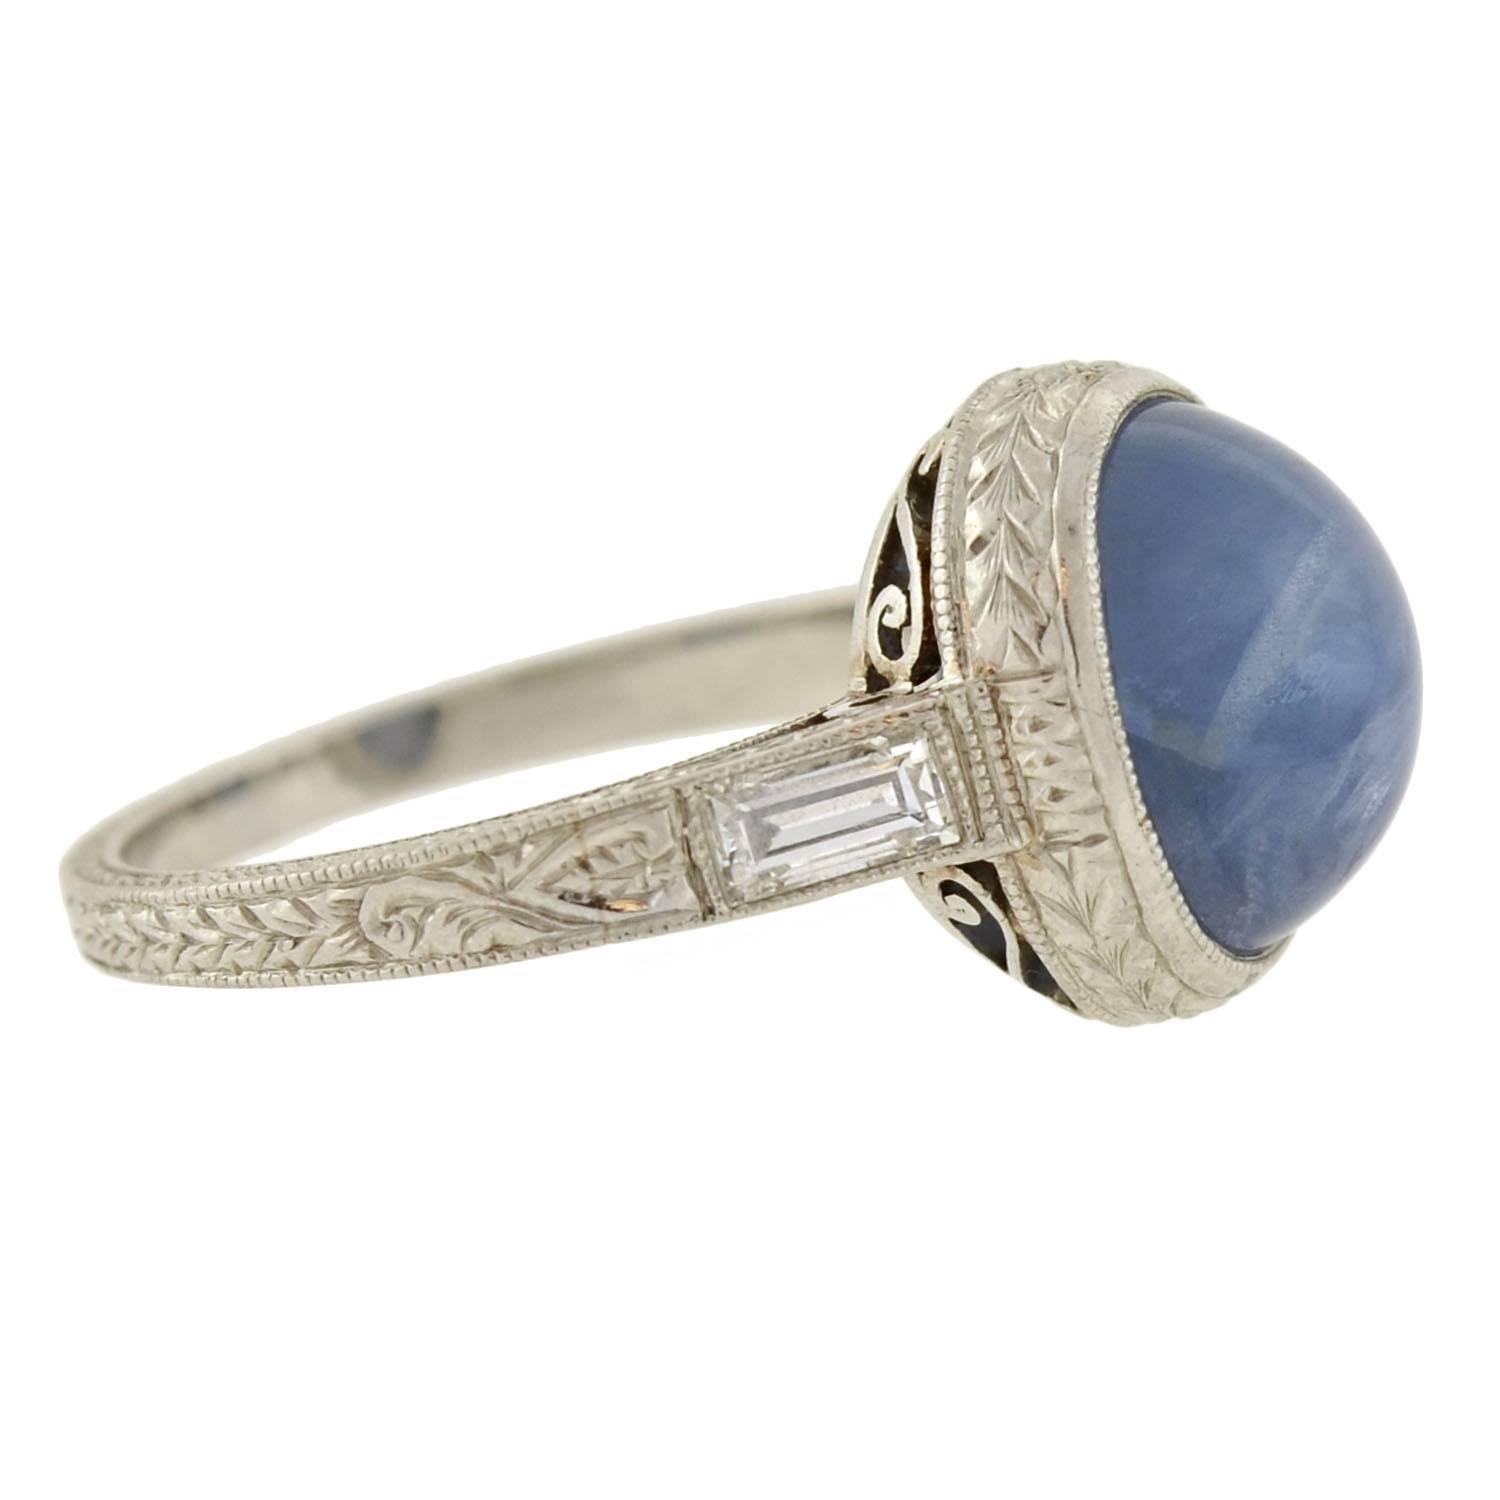 A beautiful star sapphire ring from the Art Deco (ca1920) era! This alluring ring holds a 2.50ct star sapphire cabochon at the center of a feminine platinum mounting. When turned in the light, the periwinkle blue stone reveals iridescent flashes at